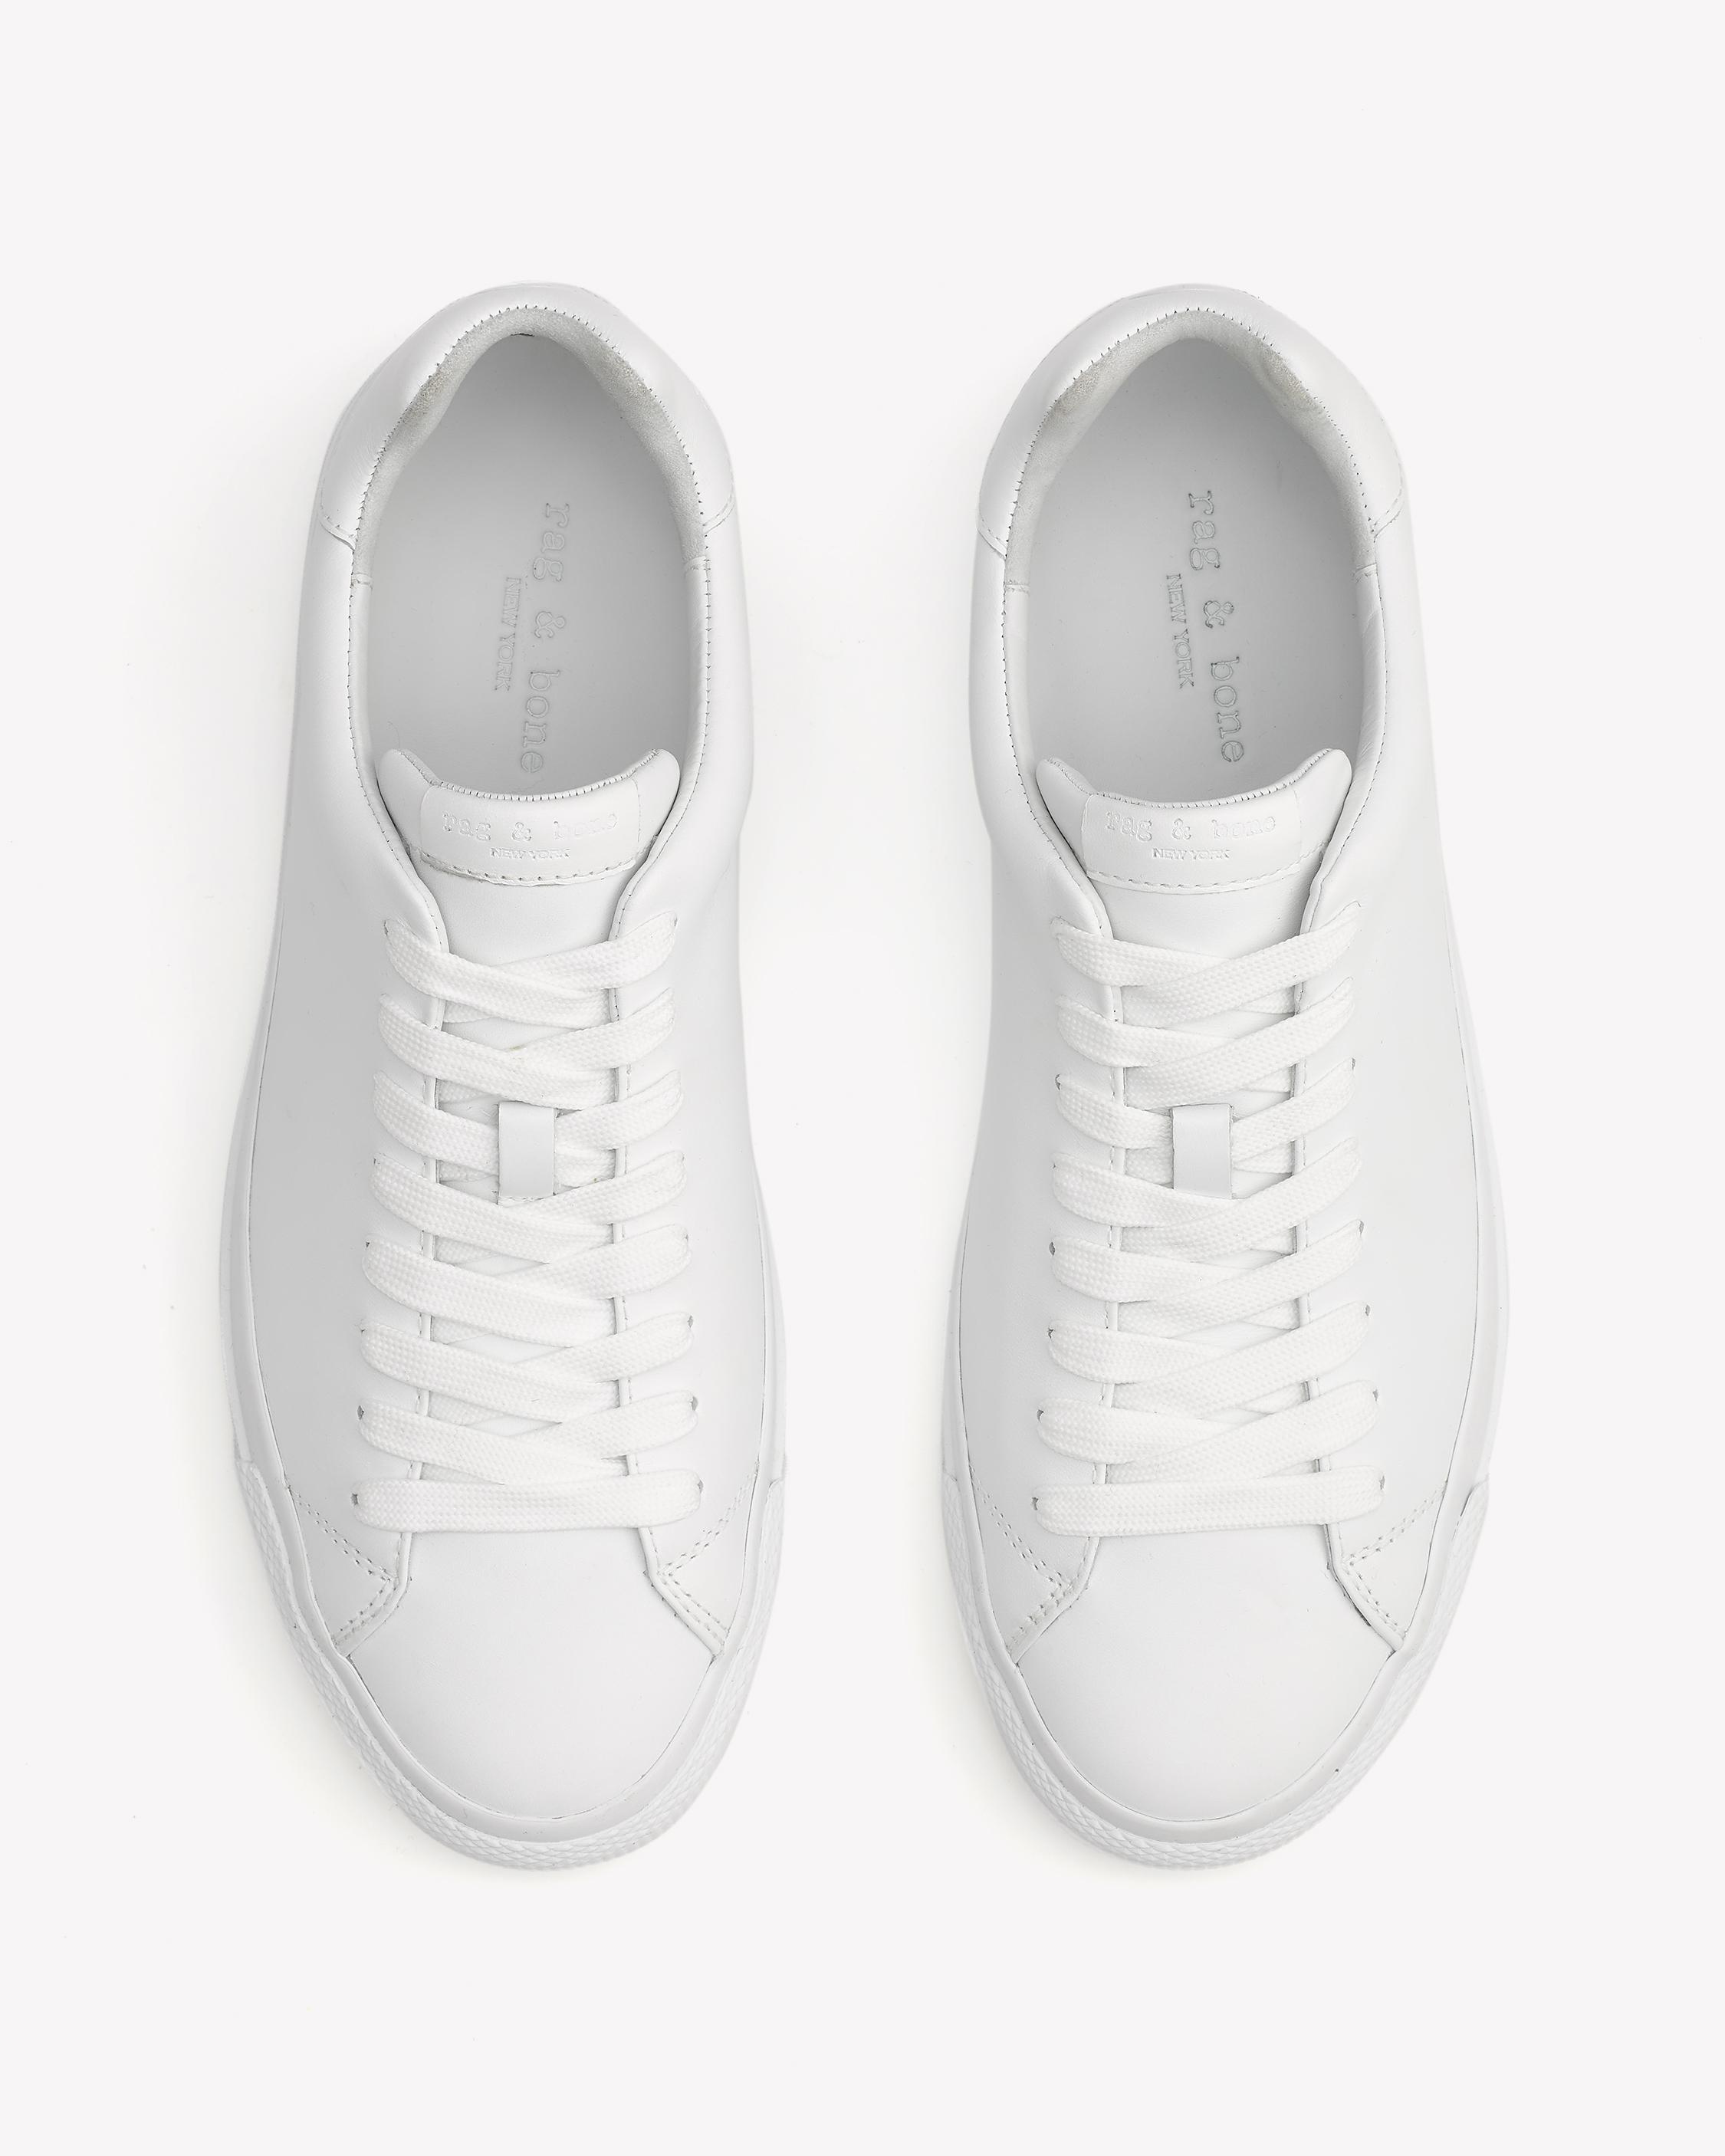 Rag & Bone Leather White Rb1 Low Sneakers for Men - Lyst